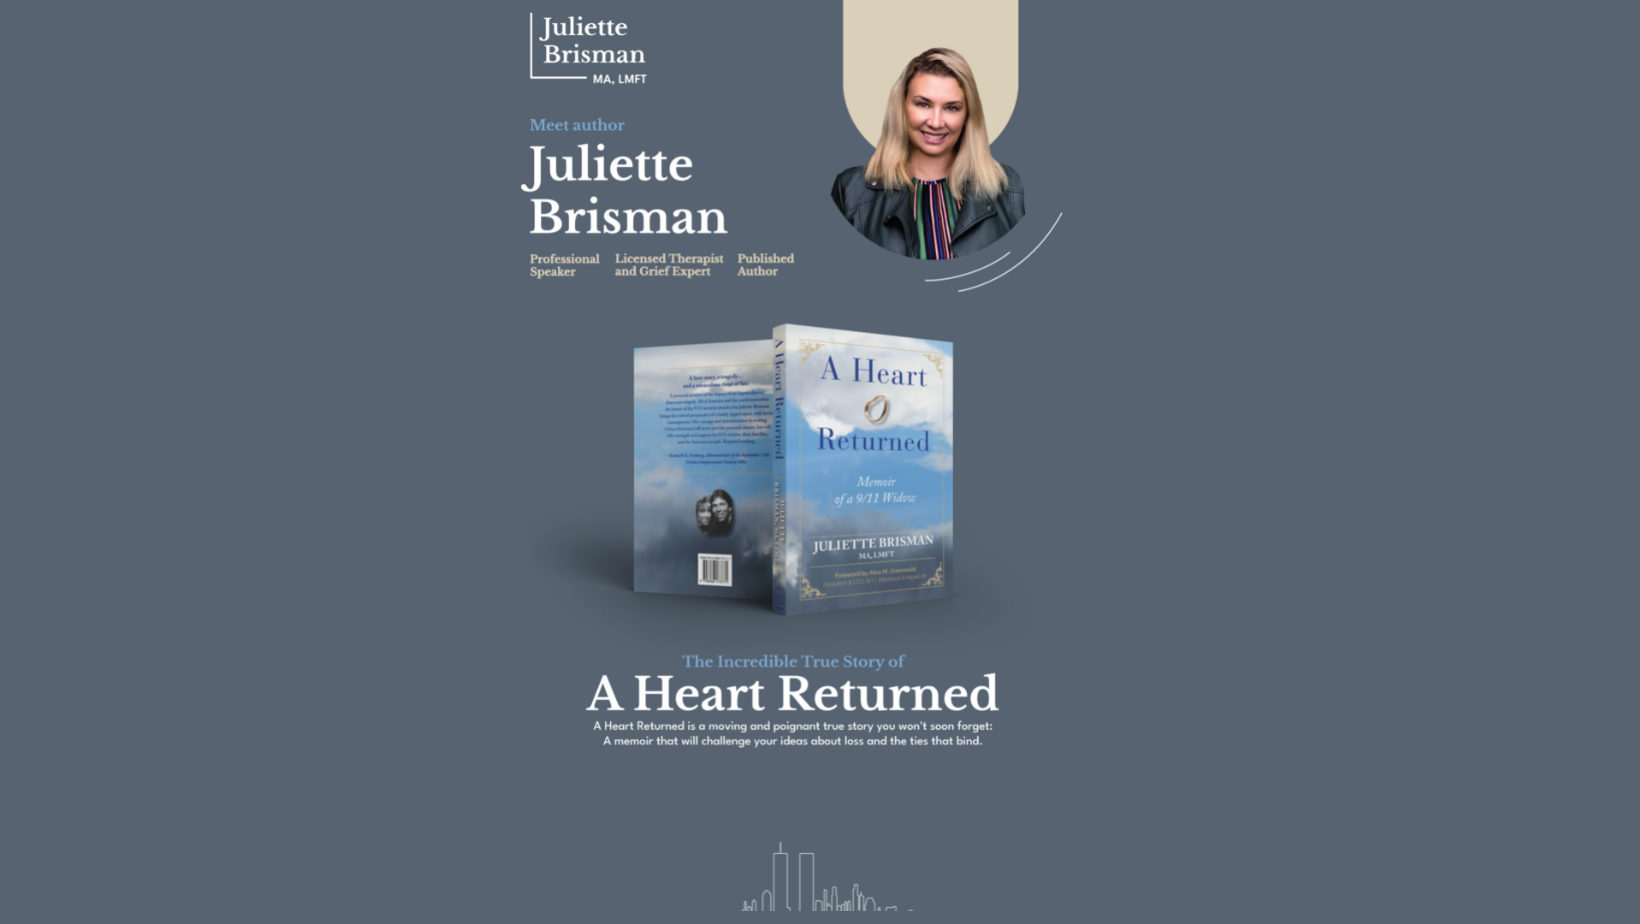 Promotional poster for book signing with Juliette Brisman